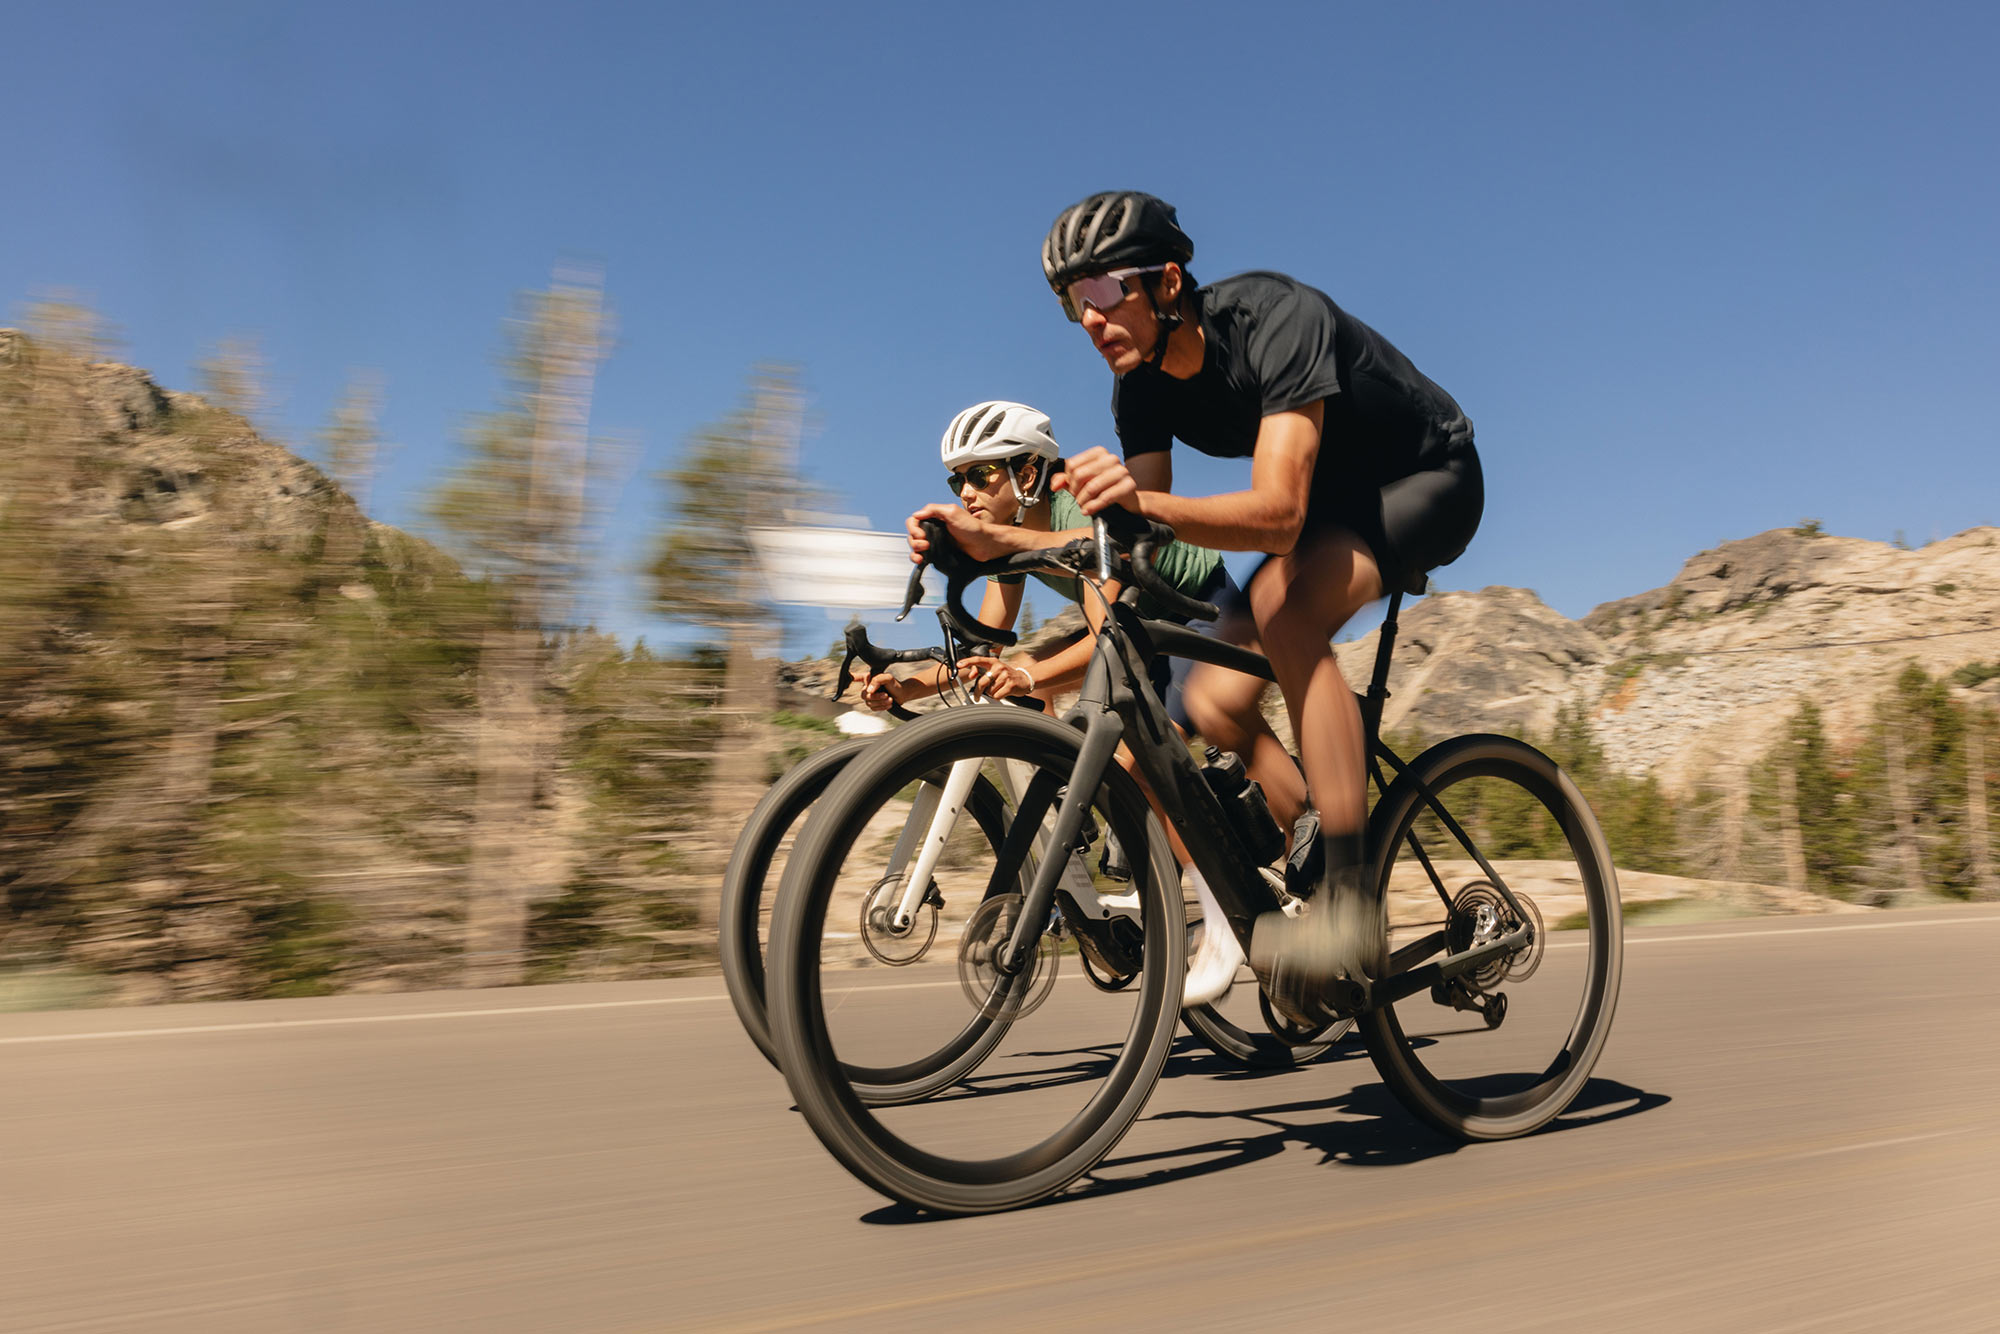 riders on the new specialized creo 2 e-road bike